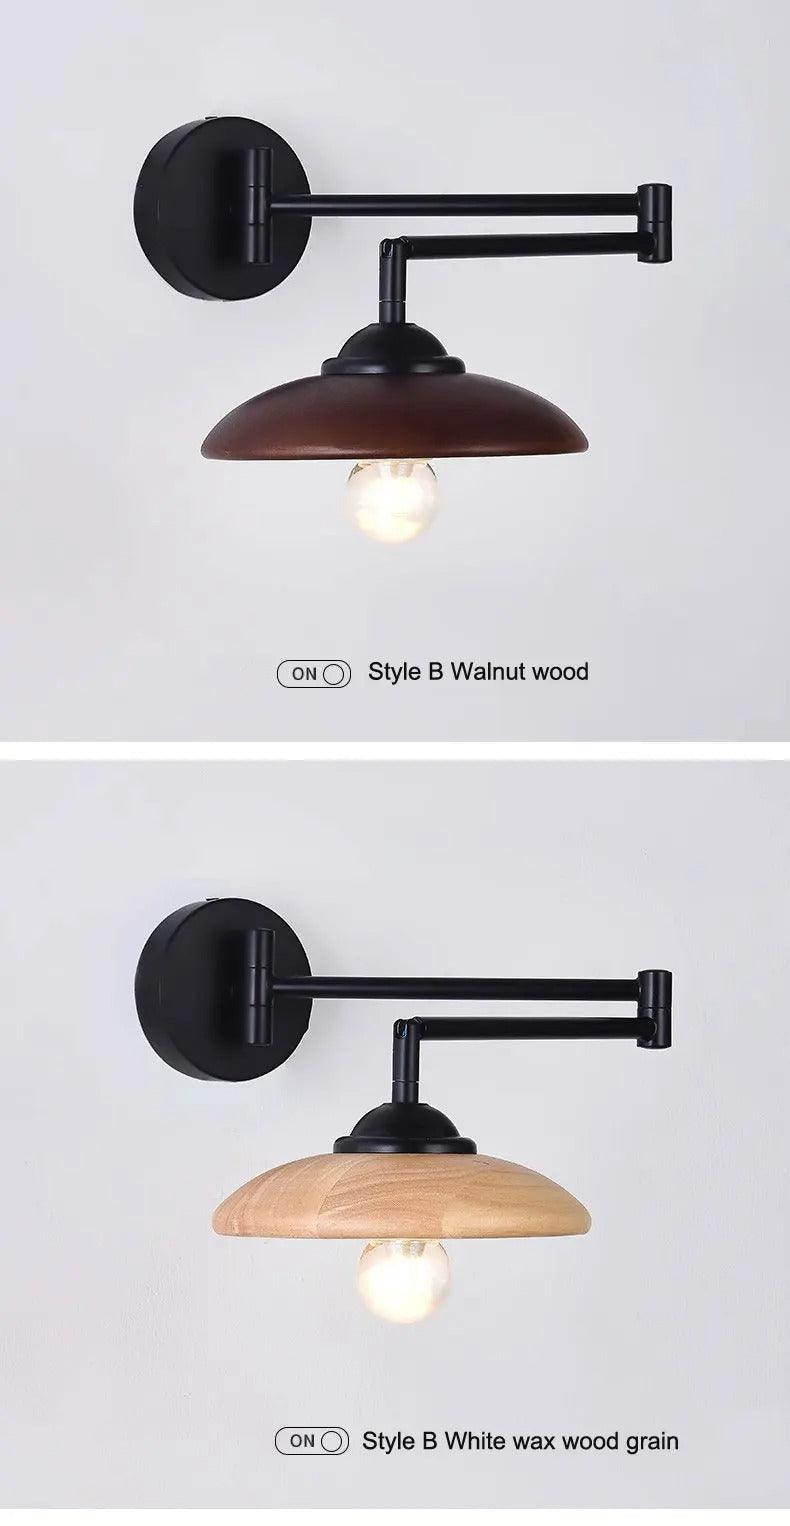 Nordic Wood Grain Wall Lighting Lamp │ Modern Retro Retractable Foldable Bedside Wall Mounted Light - Besontique